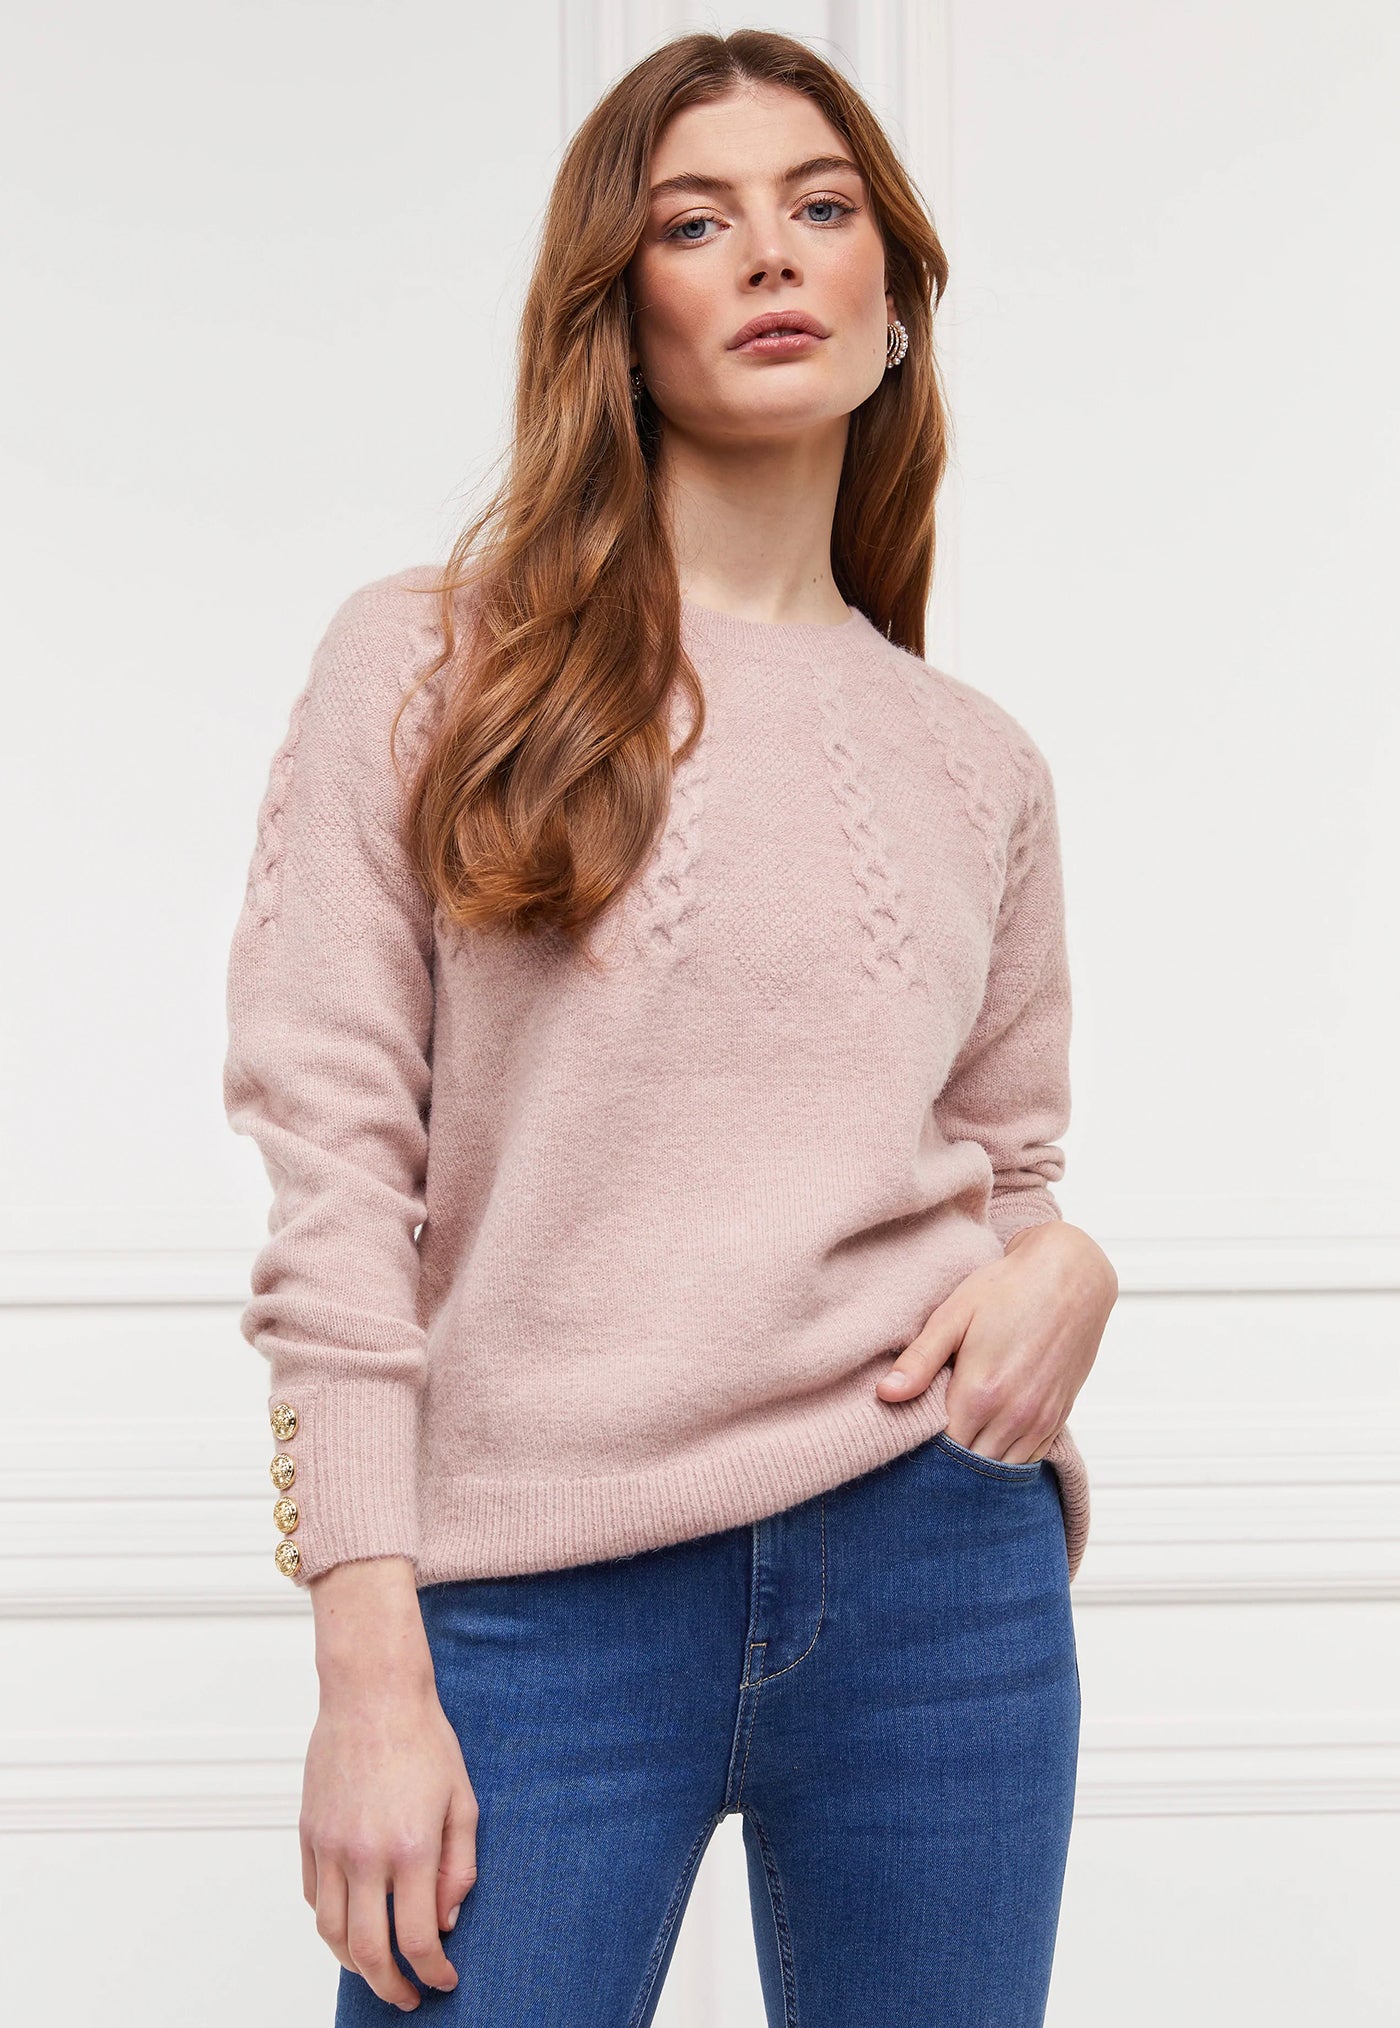 Astoria Half Cable Knit - Blush Pink sold by Angel Divine